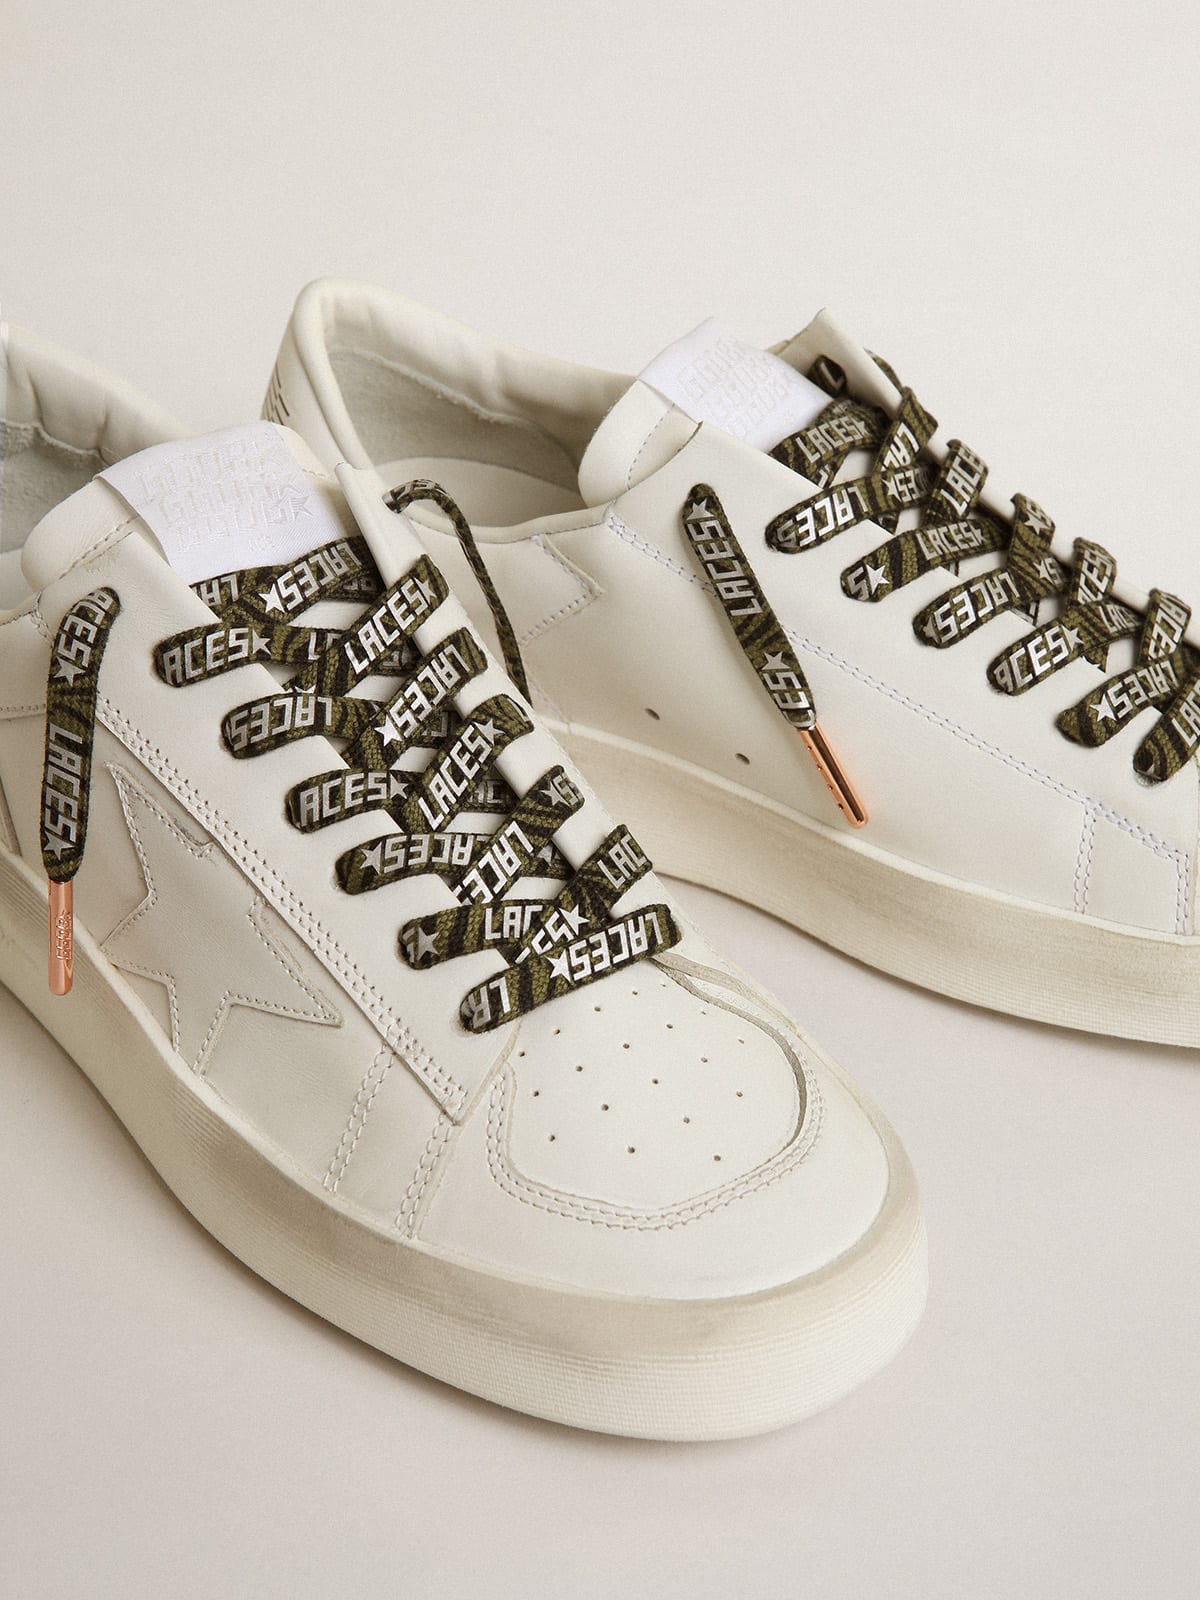 Golden Goose - Green and black zebra-print laces with contrasting silver-colored ‘Laces’ lettering in 